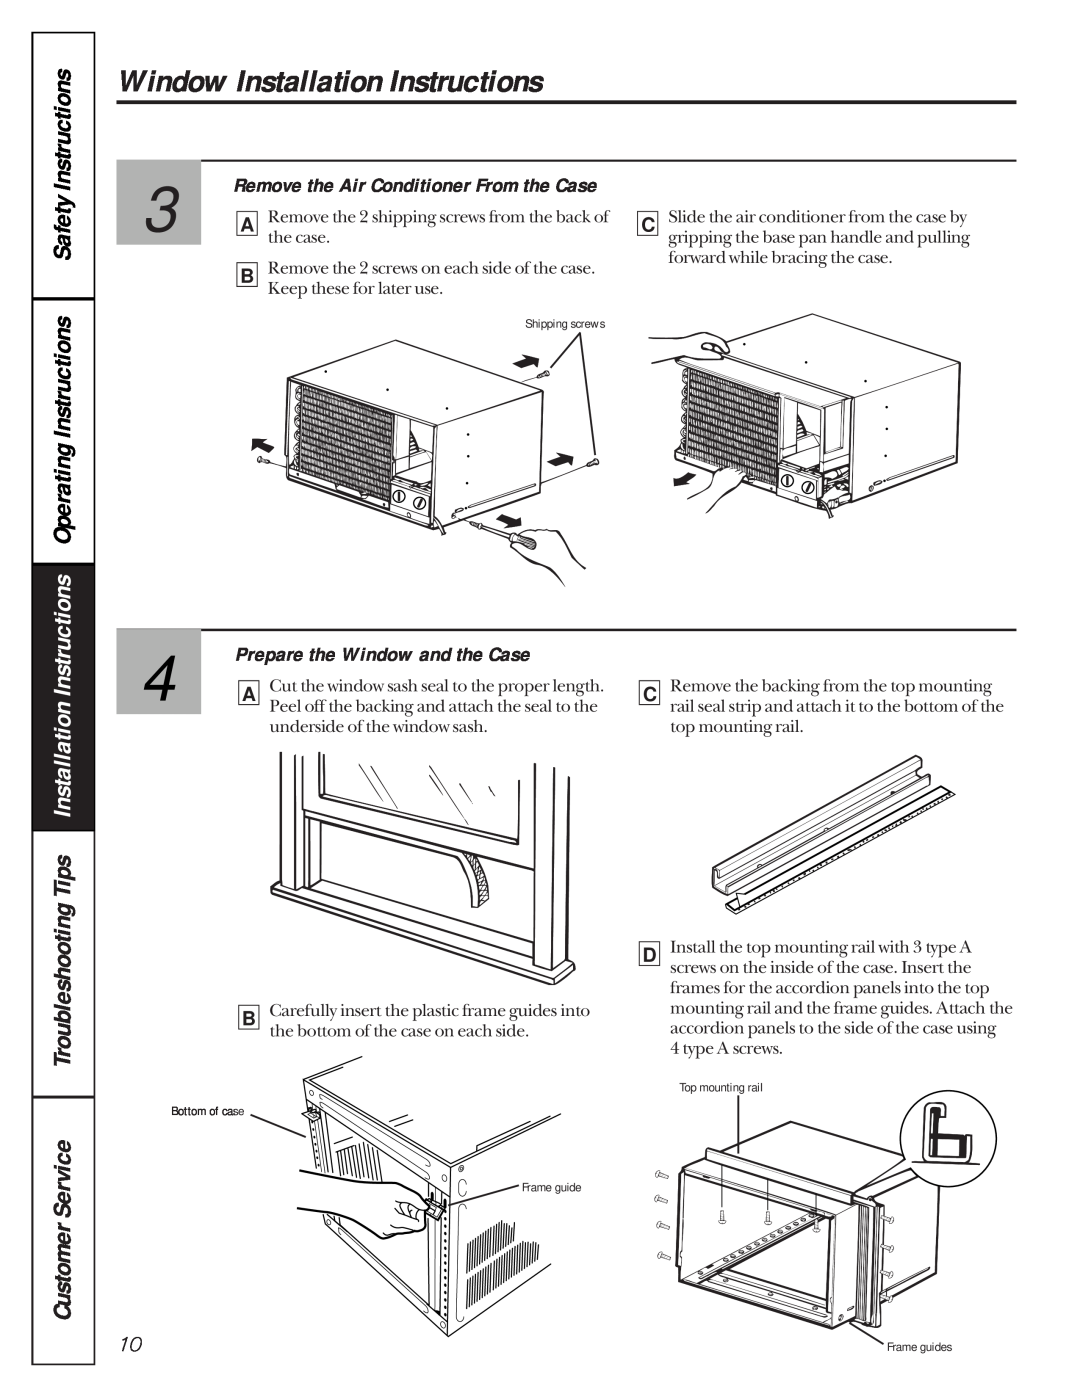 GE AGH08 TroubleshootingTips, Remove the Air Conditioner From the Case, Window Installation Instructions, CustomerService 